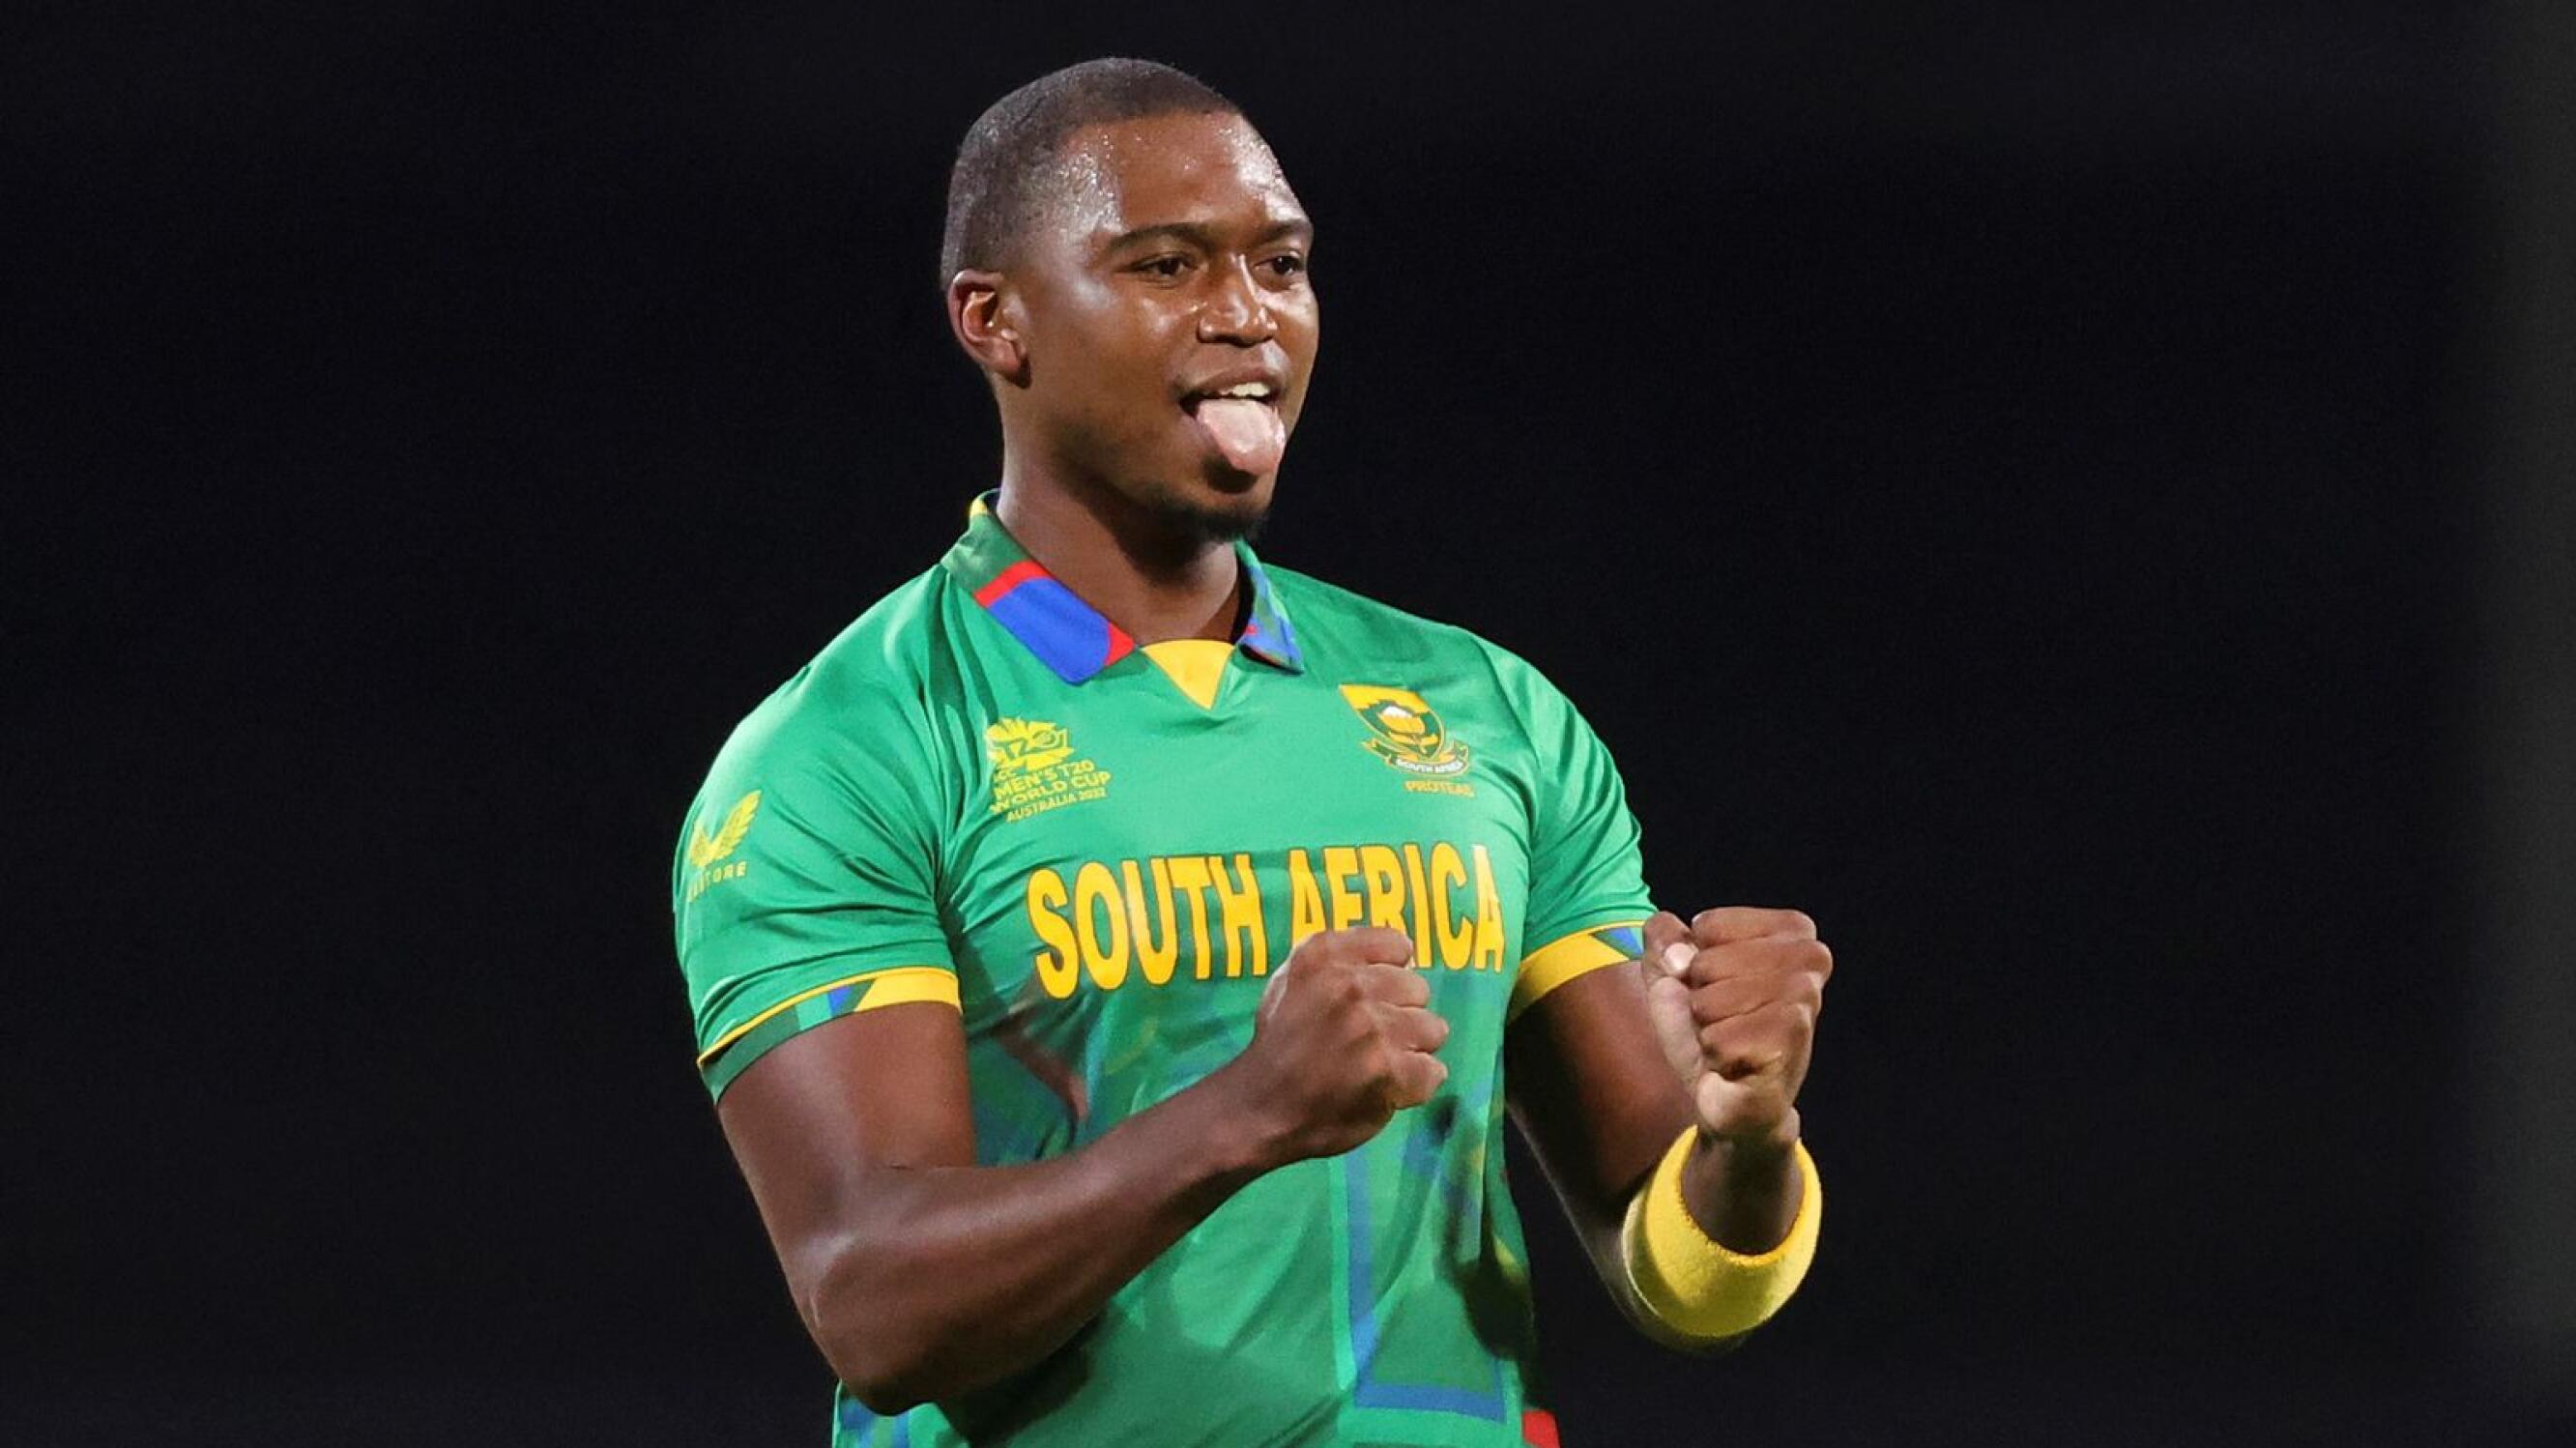 South Africa's Lungi Ngidi celebrates his wicket of Zimbabwe's Sikandar Raza during the ICC men's Twenty20 World Cup 2022 cricket match between South Africa and Zimbabwe at Bellerive Oval in Hobart